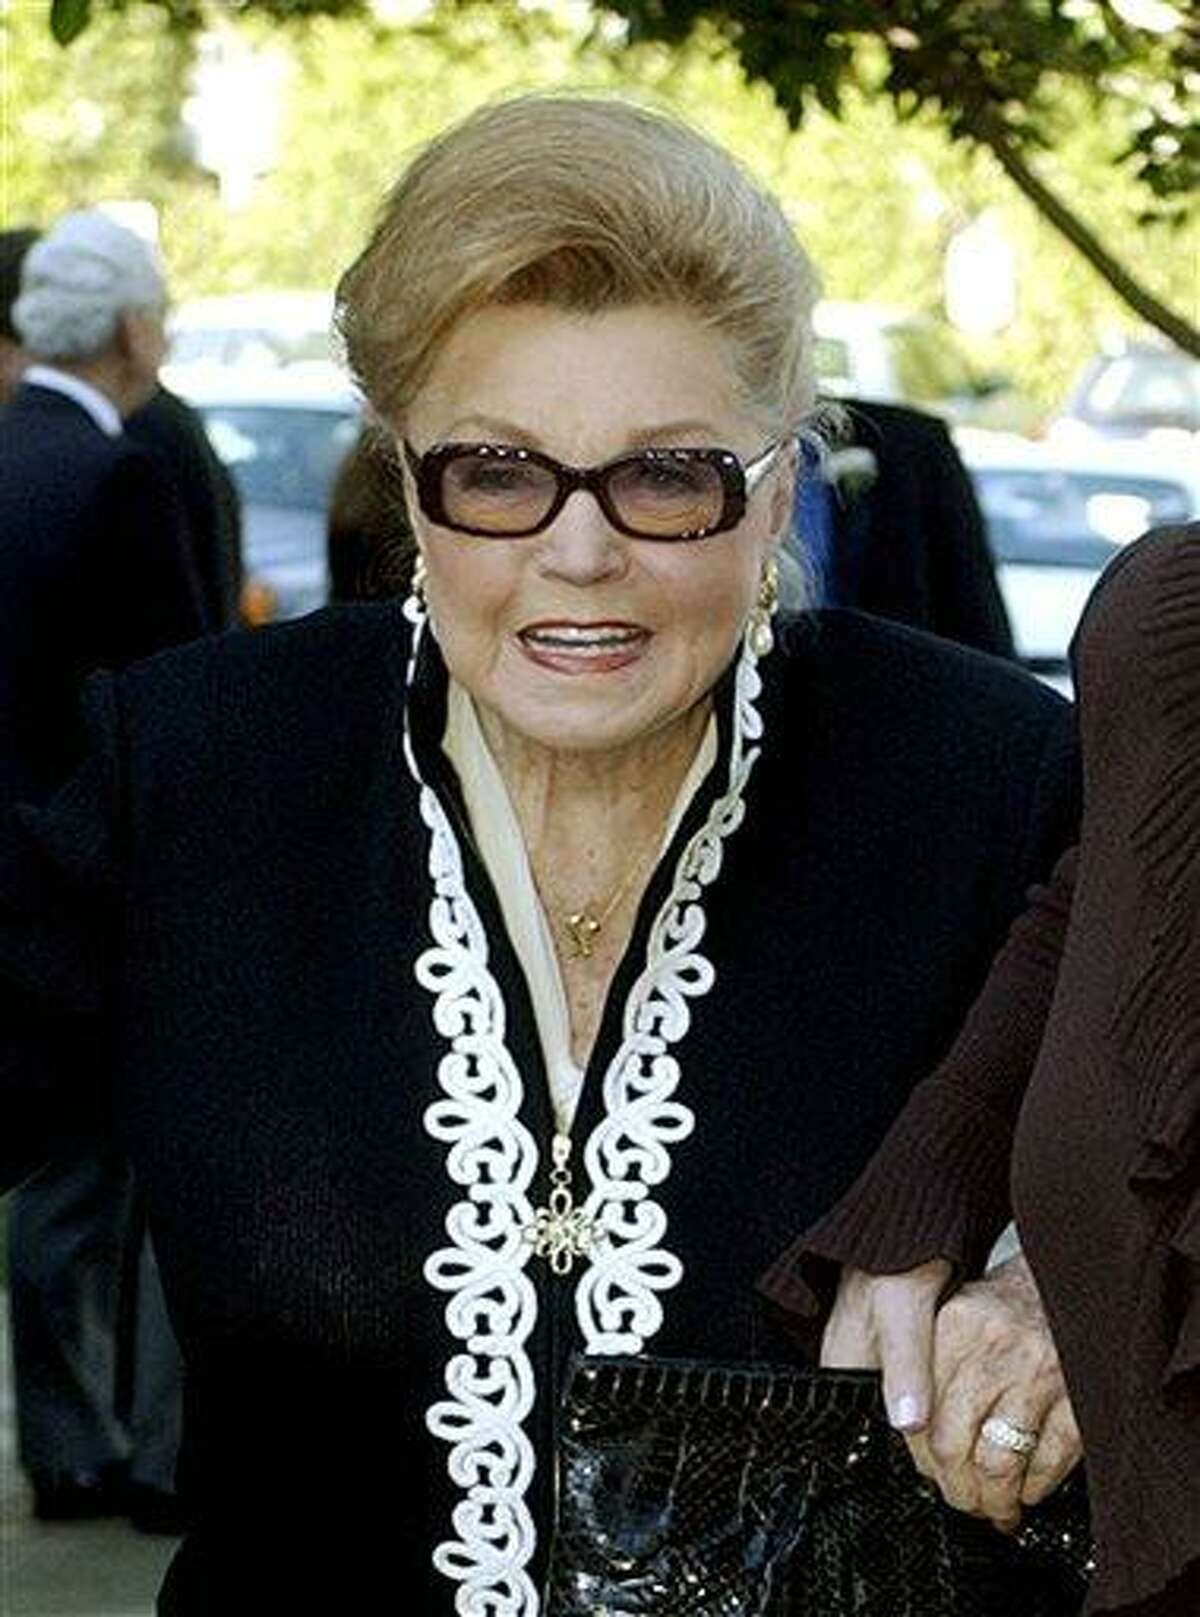 FILE - This Jan. 28, 2004 file photo shows Esther Williams at the funeral service for dancer/actress Ann Miller at St. Mel Catholic Church in Los Angeles' Woodland Hills area. According to a press representative, Williams died in her sleep on Thursday, June 6, 2013, in Beverly Hills, Calif. She was 91. (AP Photo/Reed Saxon, file)